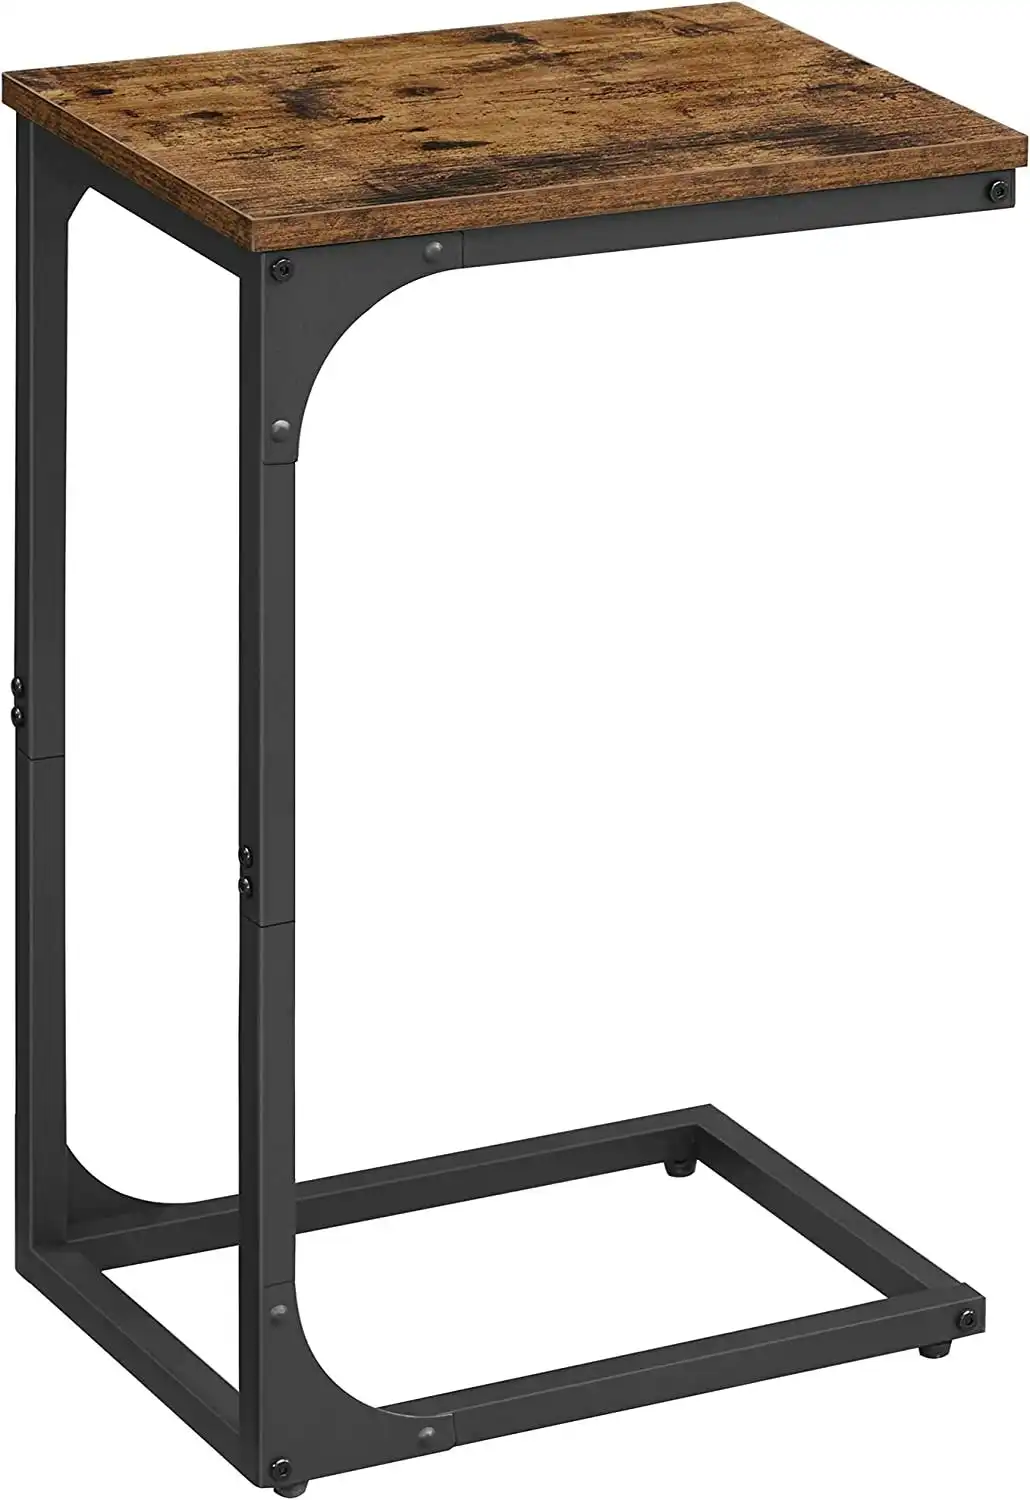 Rustic Brown and Black C-Shaped End Table - Industrial Sofa Side Table